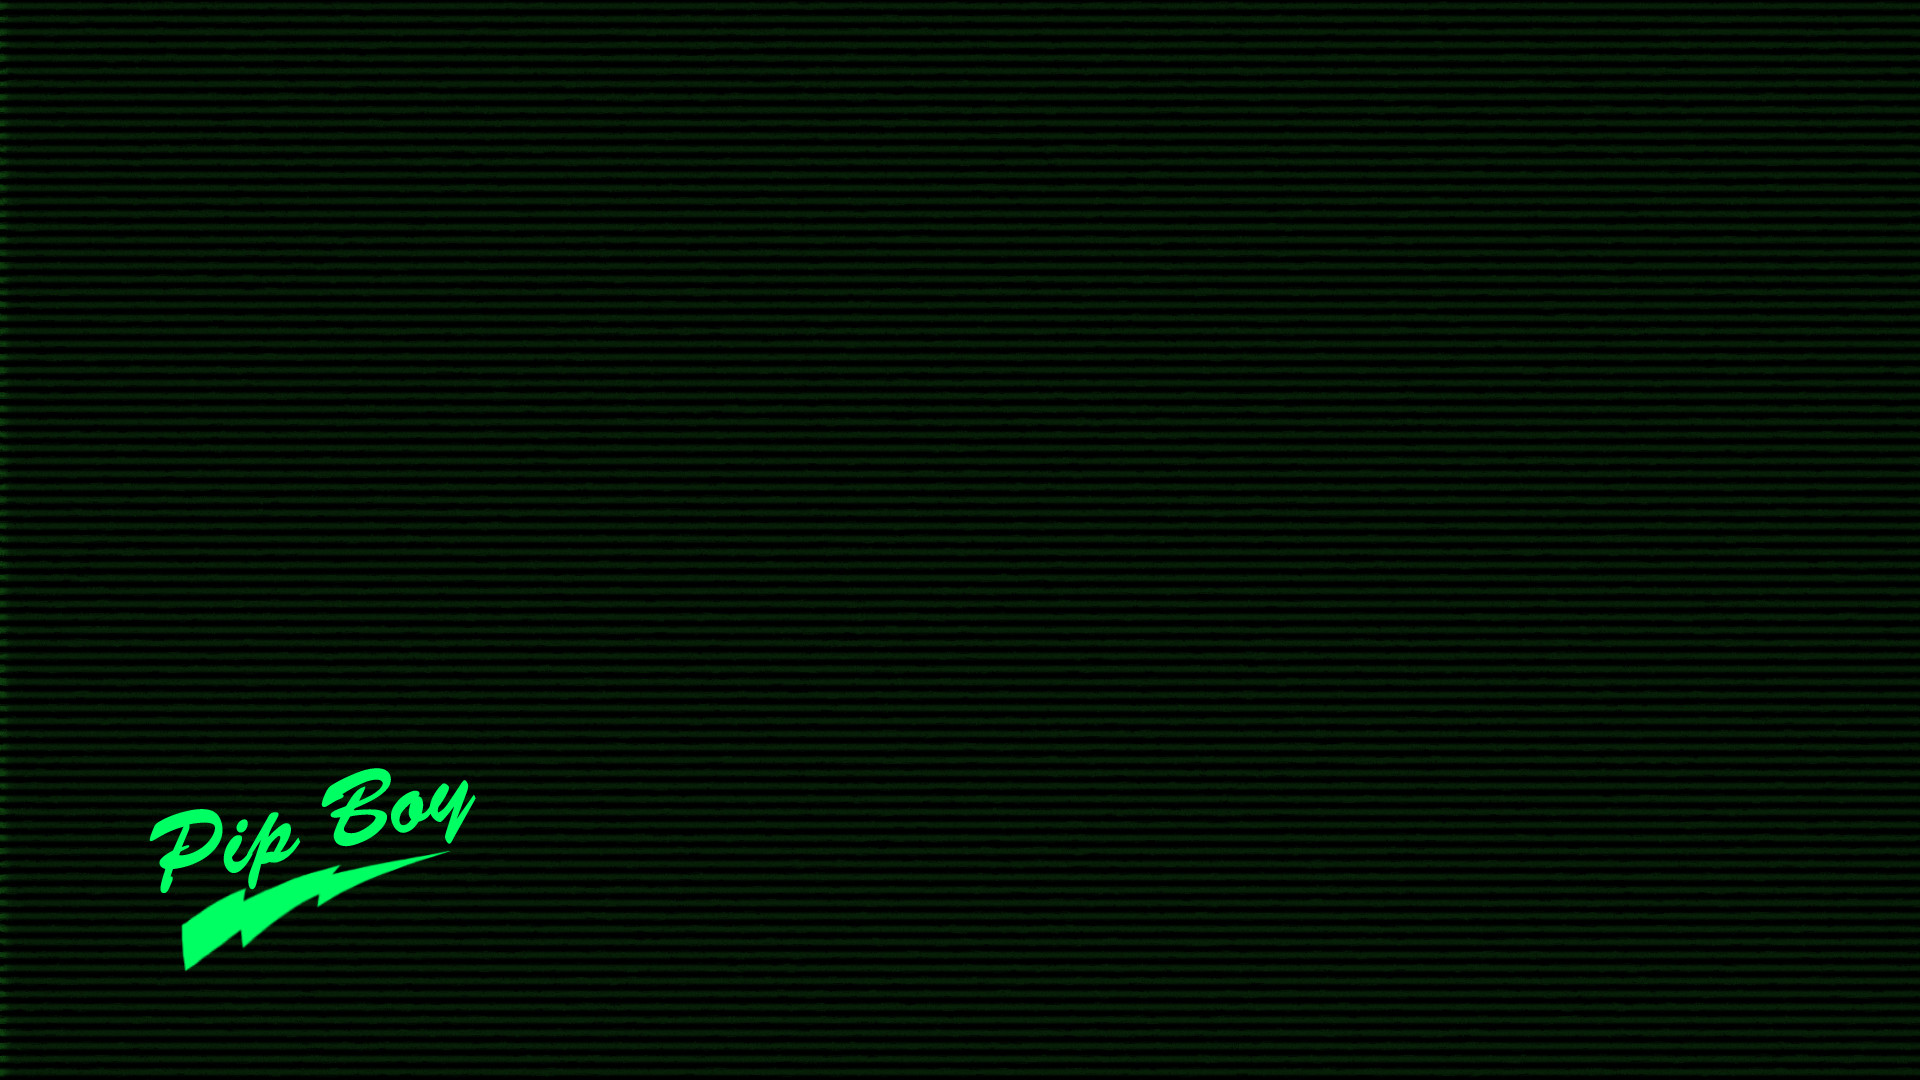 1920x1080  Robco Industries Pip Boy iPad 1 2 Wallpaper | ID: 57402 | Images .